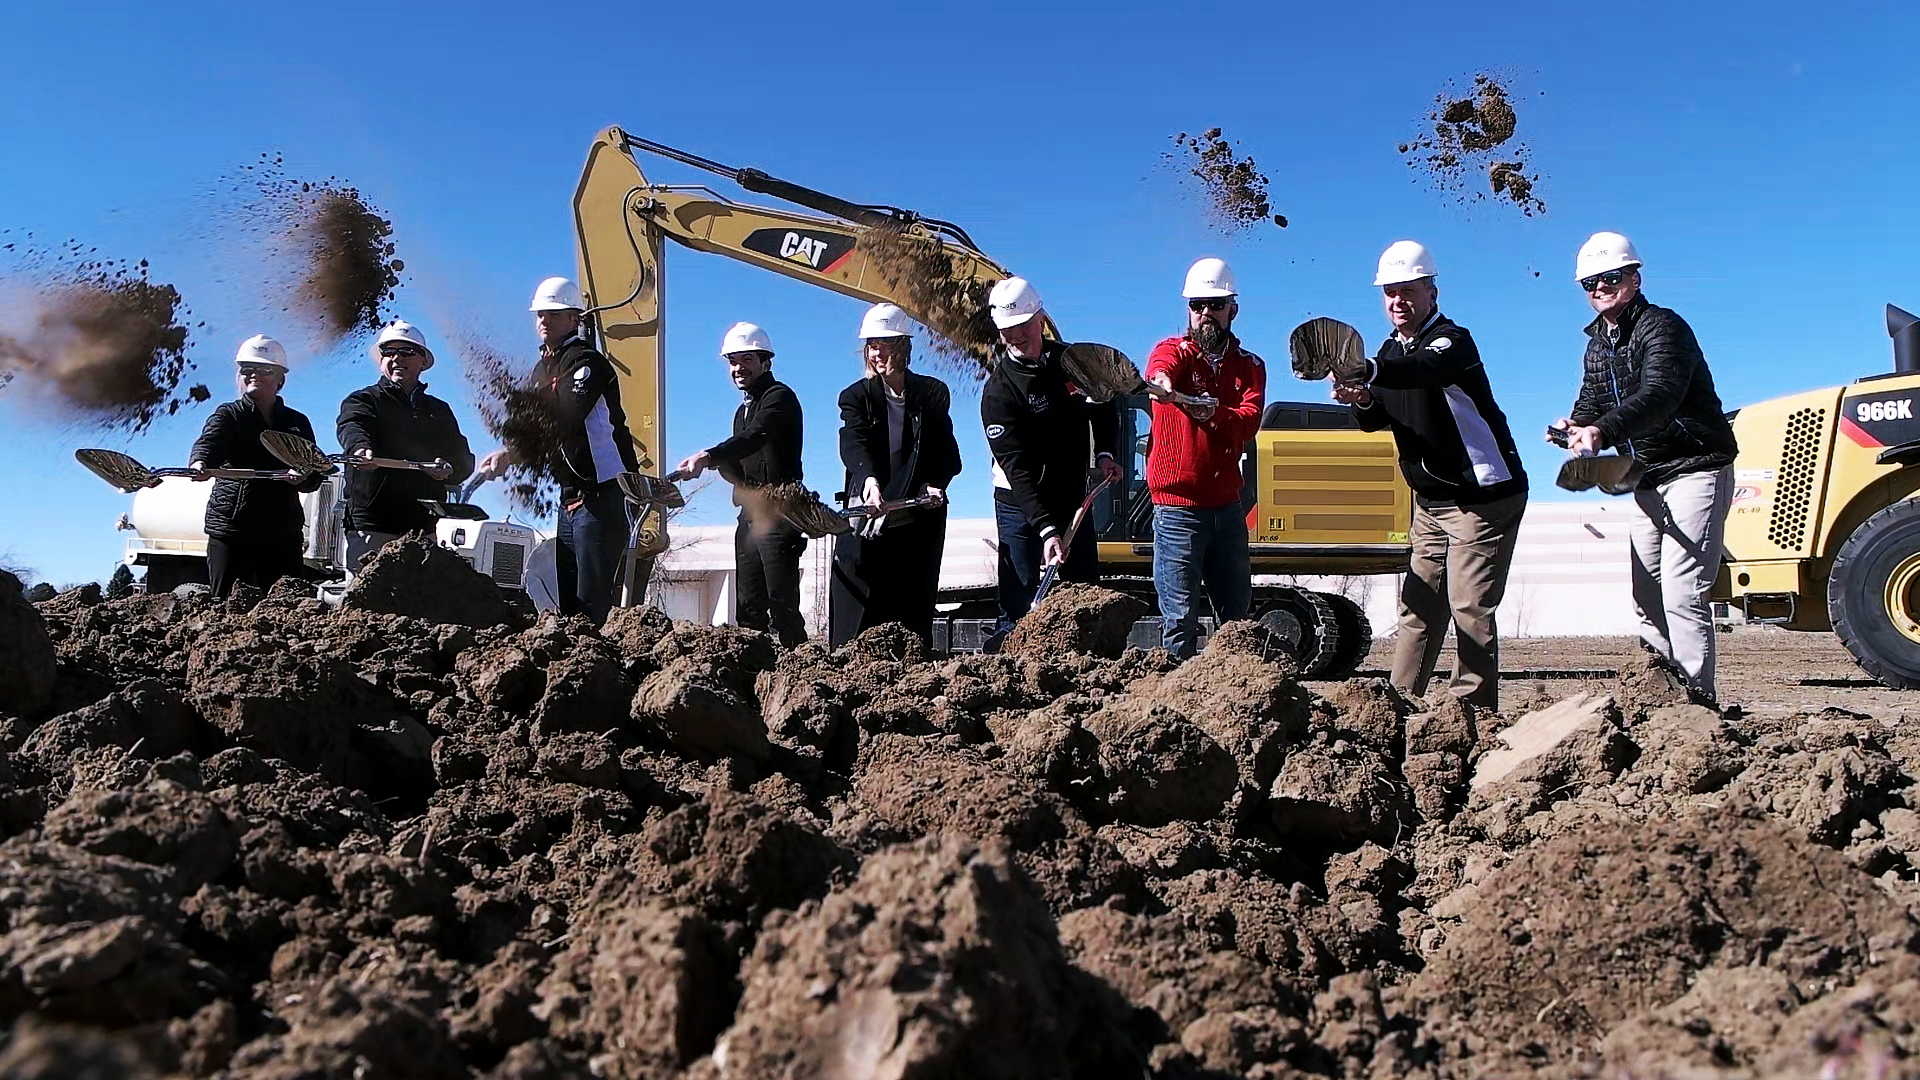 Key members of the RUPES USA management team toss the first few shovels of earth on what will be the new US headquarters